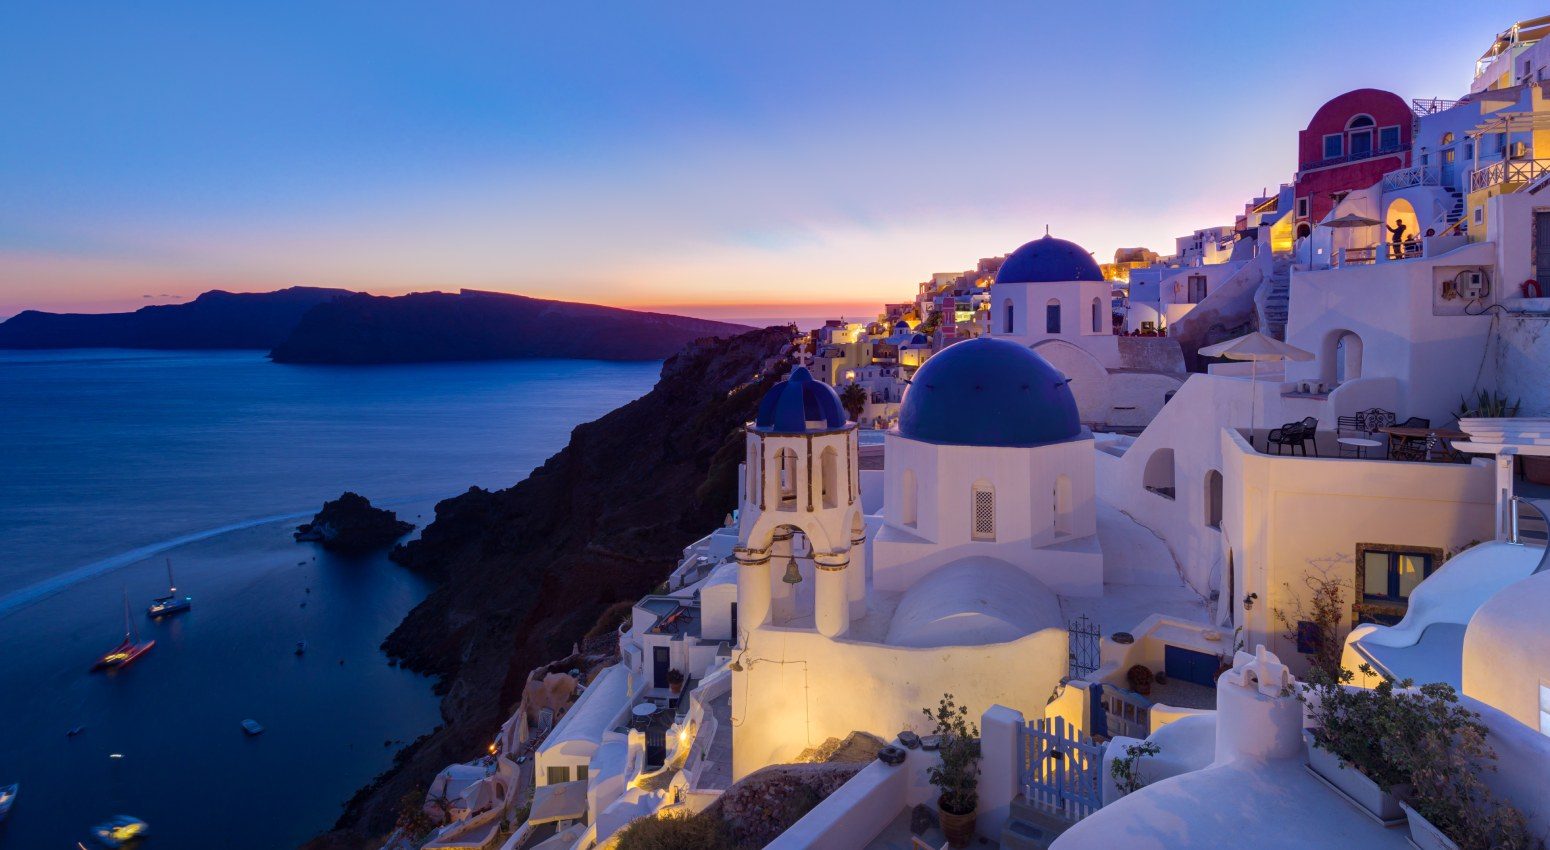 View to traditional white houses in Caldera of Santorini during sunset